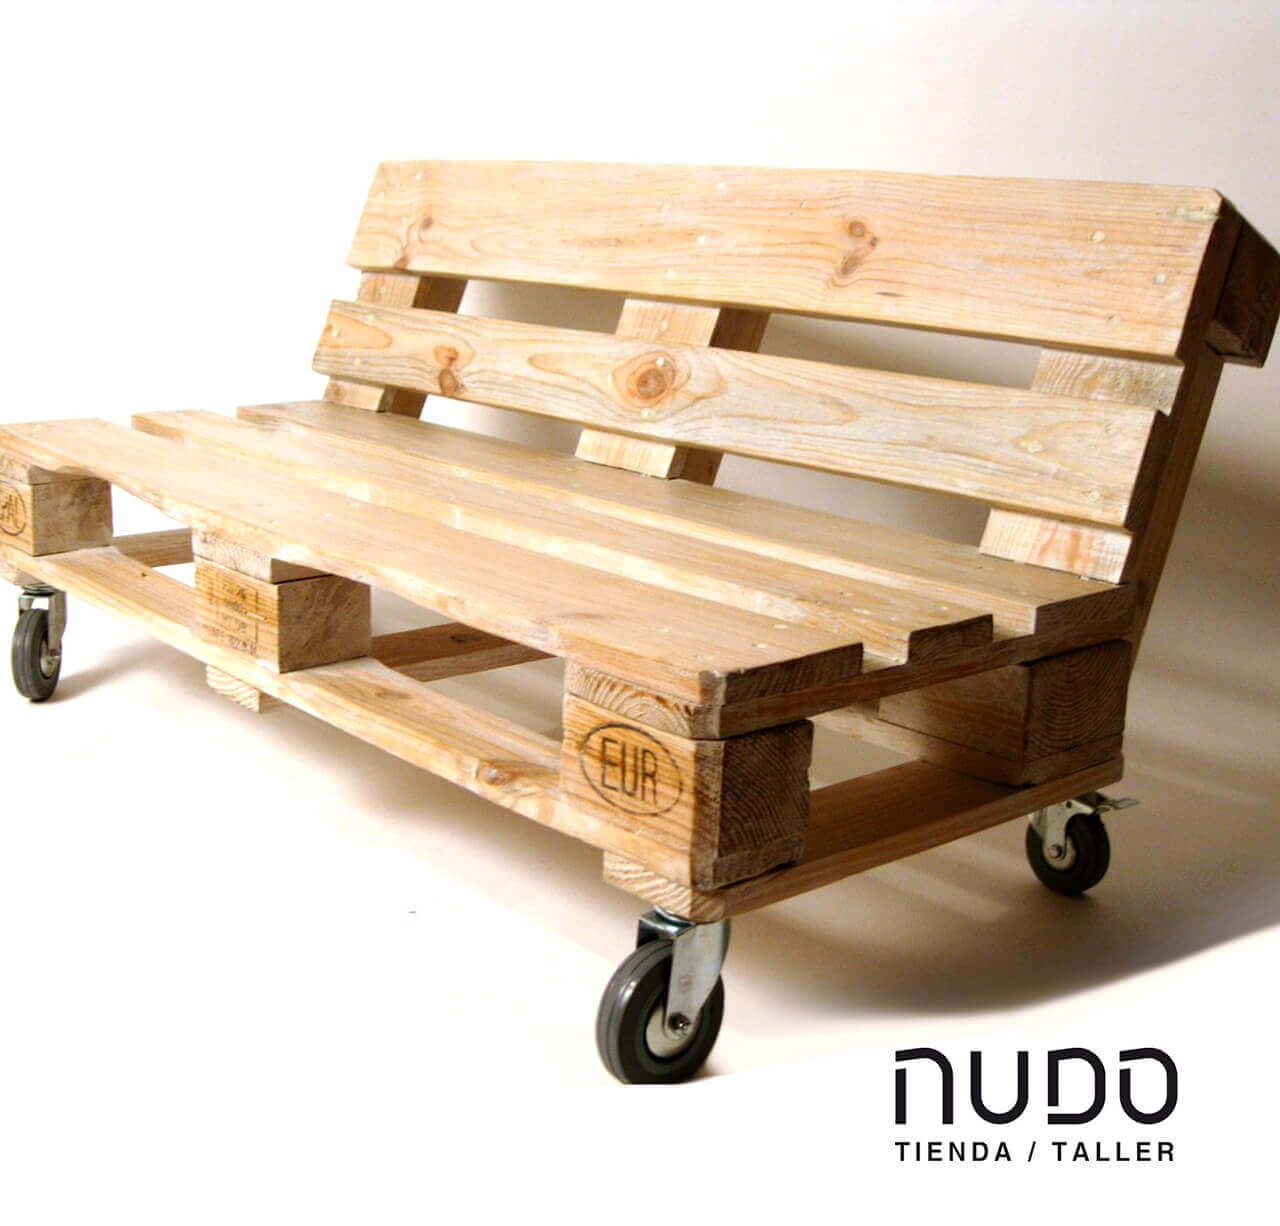 Outdoor Pallet Furniture Ideas with Wheels for Moving